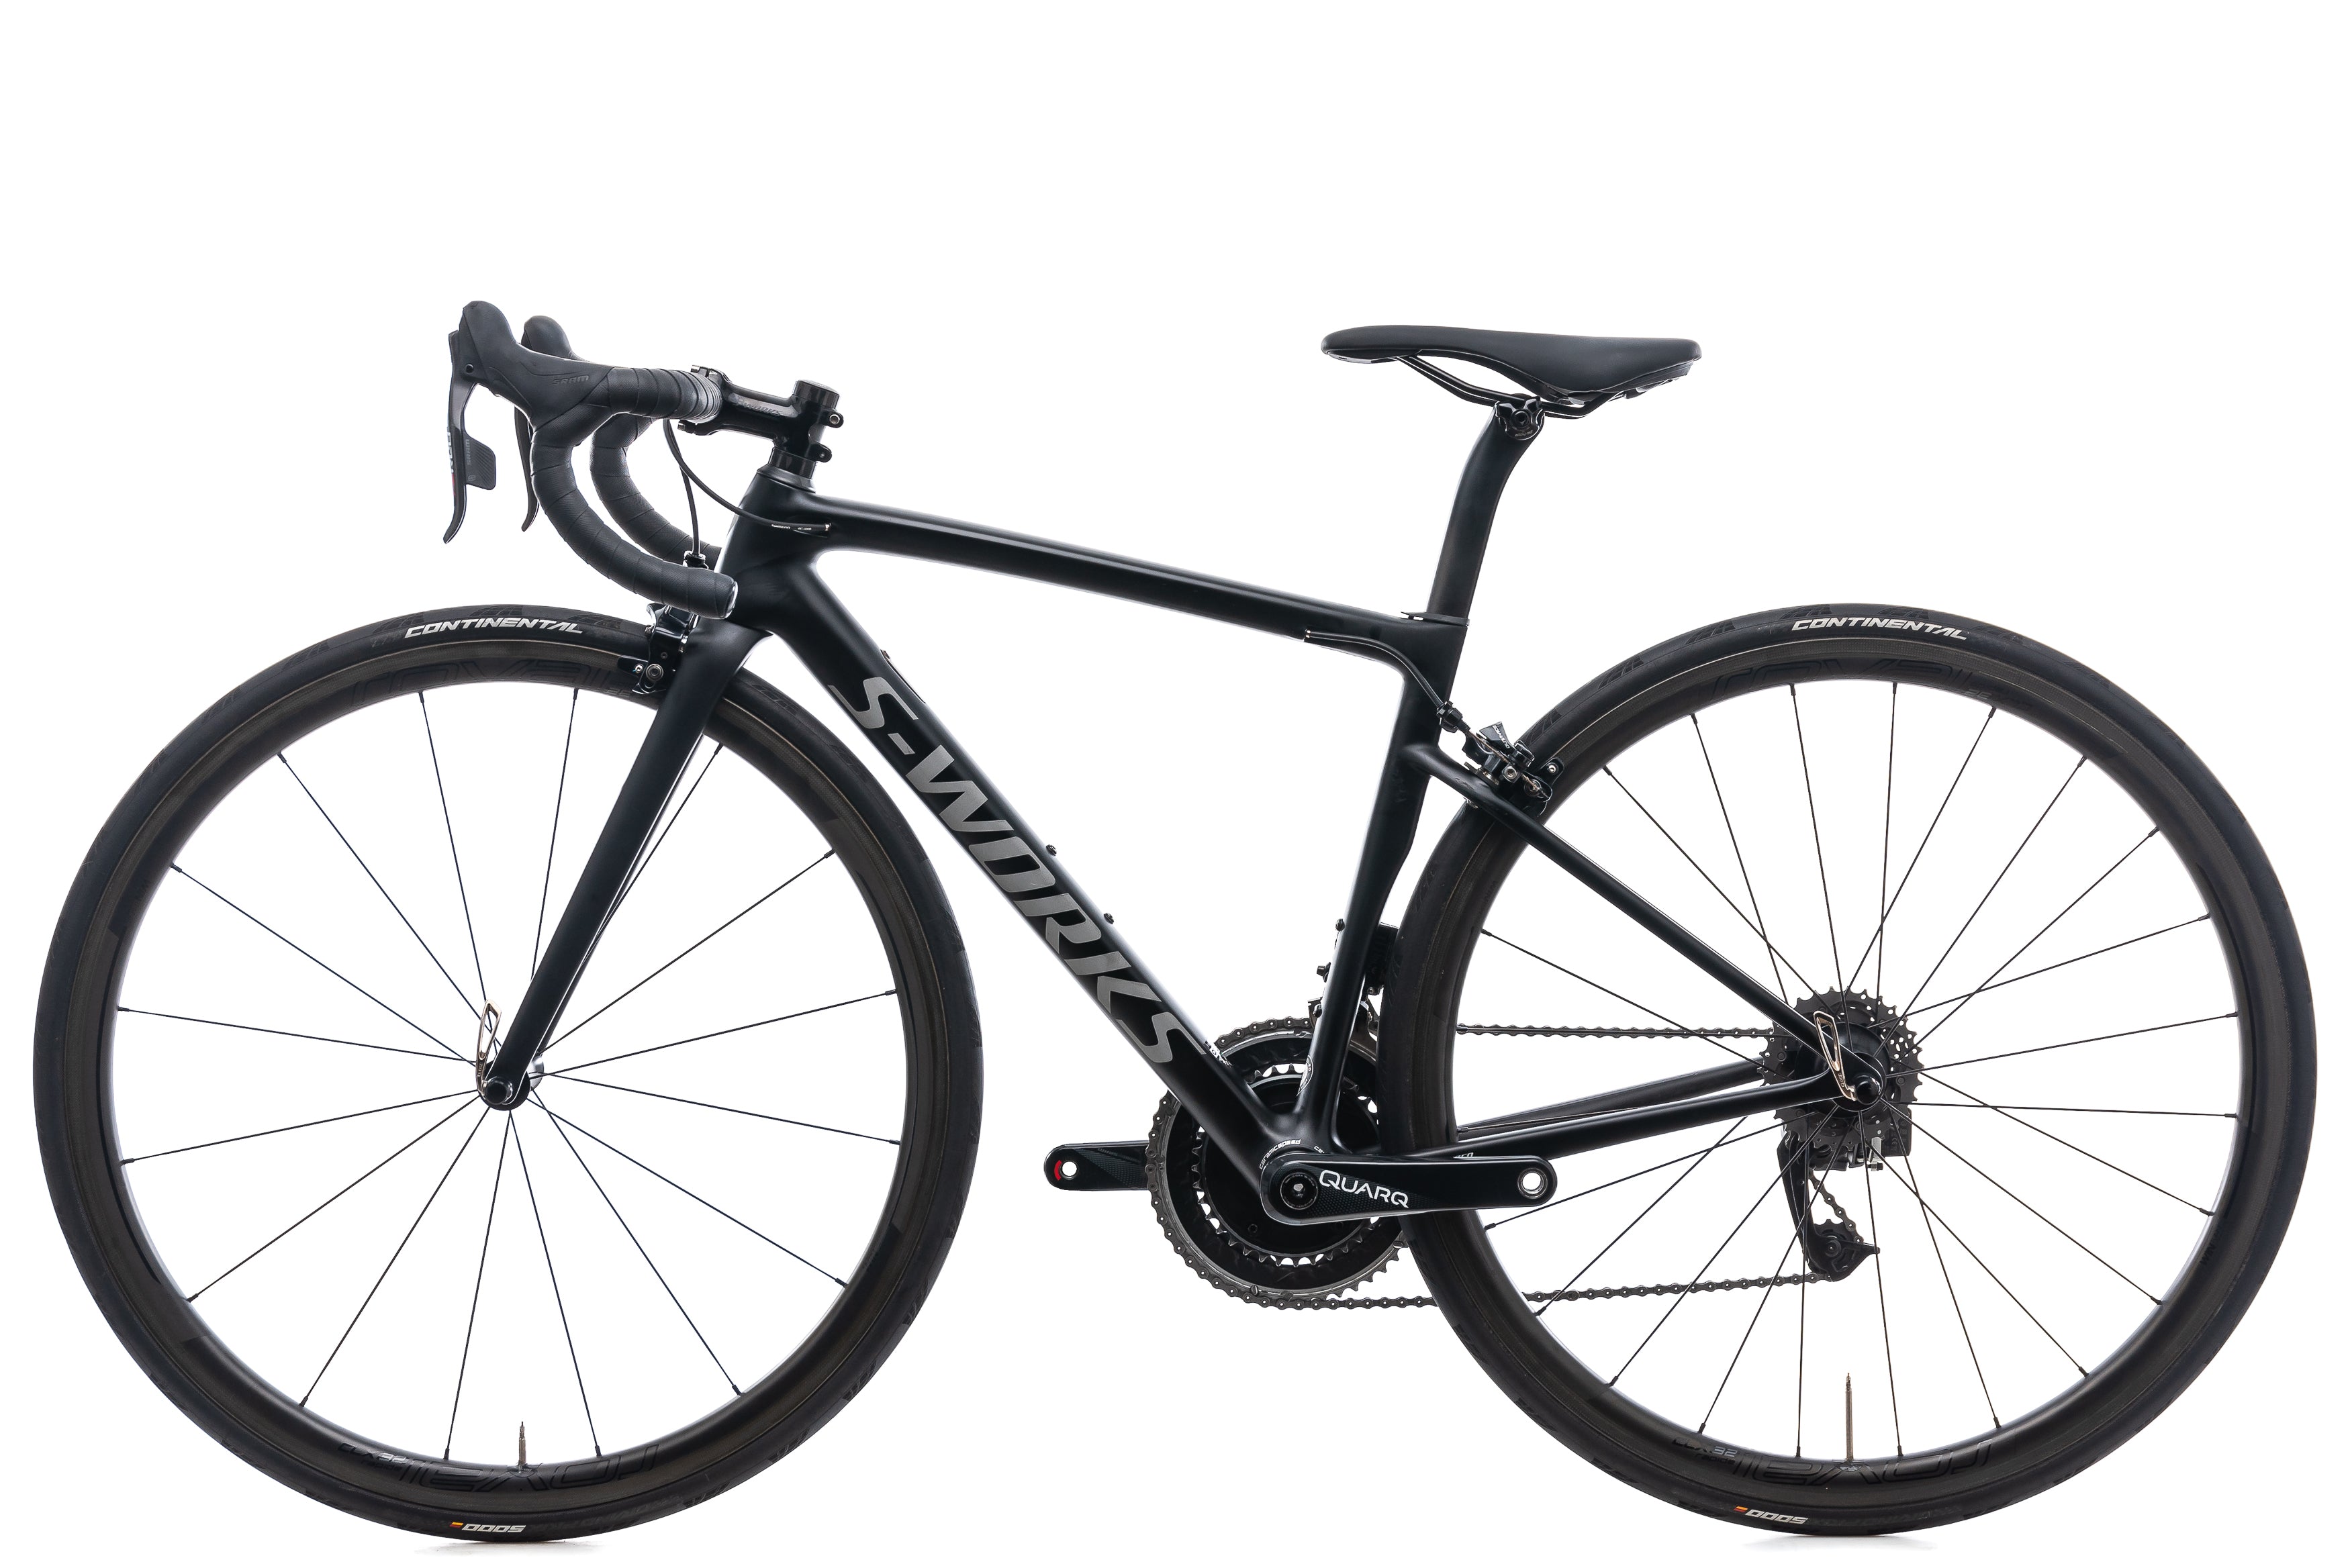 text_set_value: Specialized S-Works Tarmac SL6 Ultralight Road 